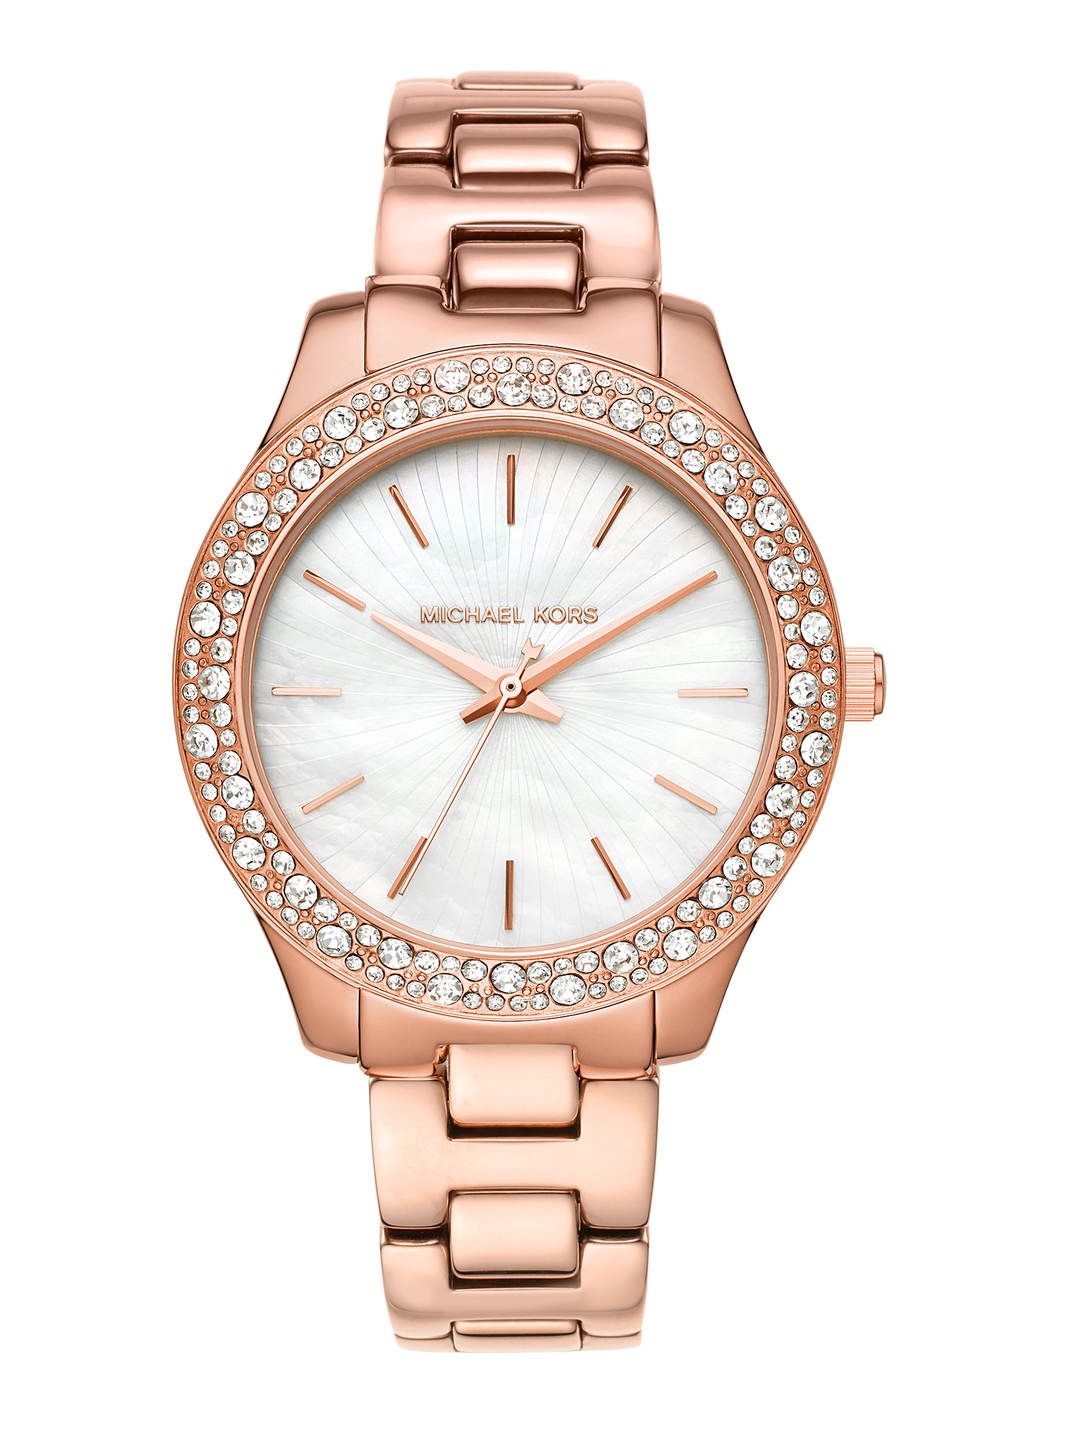 Michael Kors Women Off-White Mother of Pearl Liliane Analogue Watch MK4557 Price in India